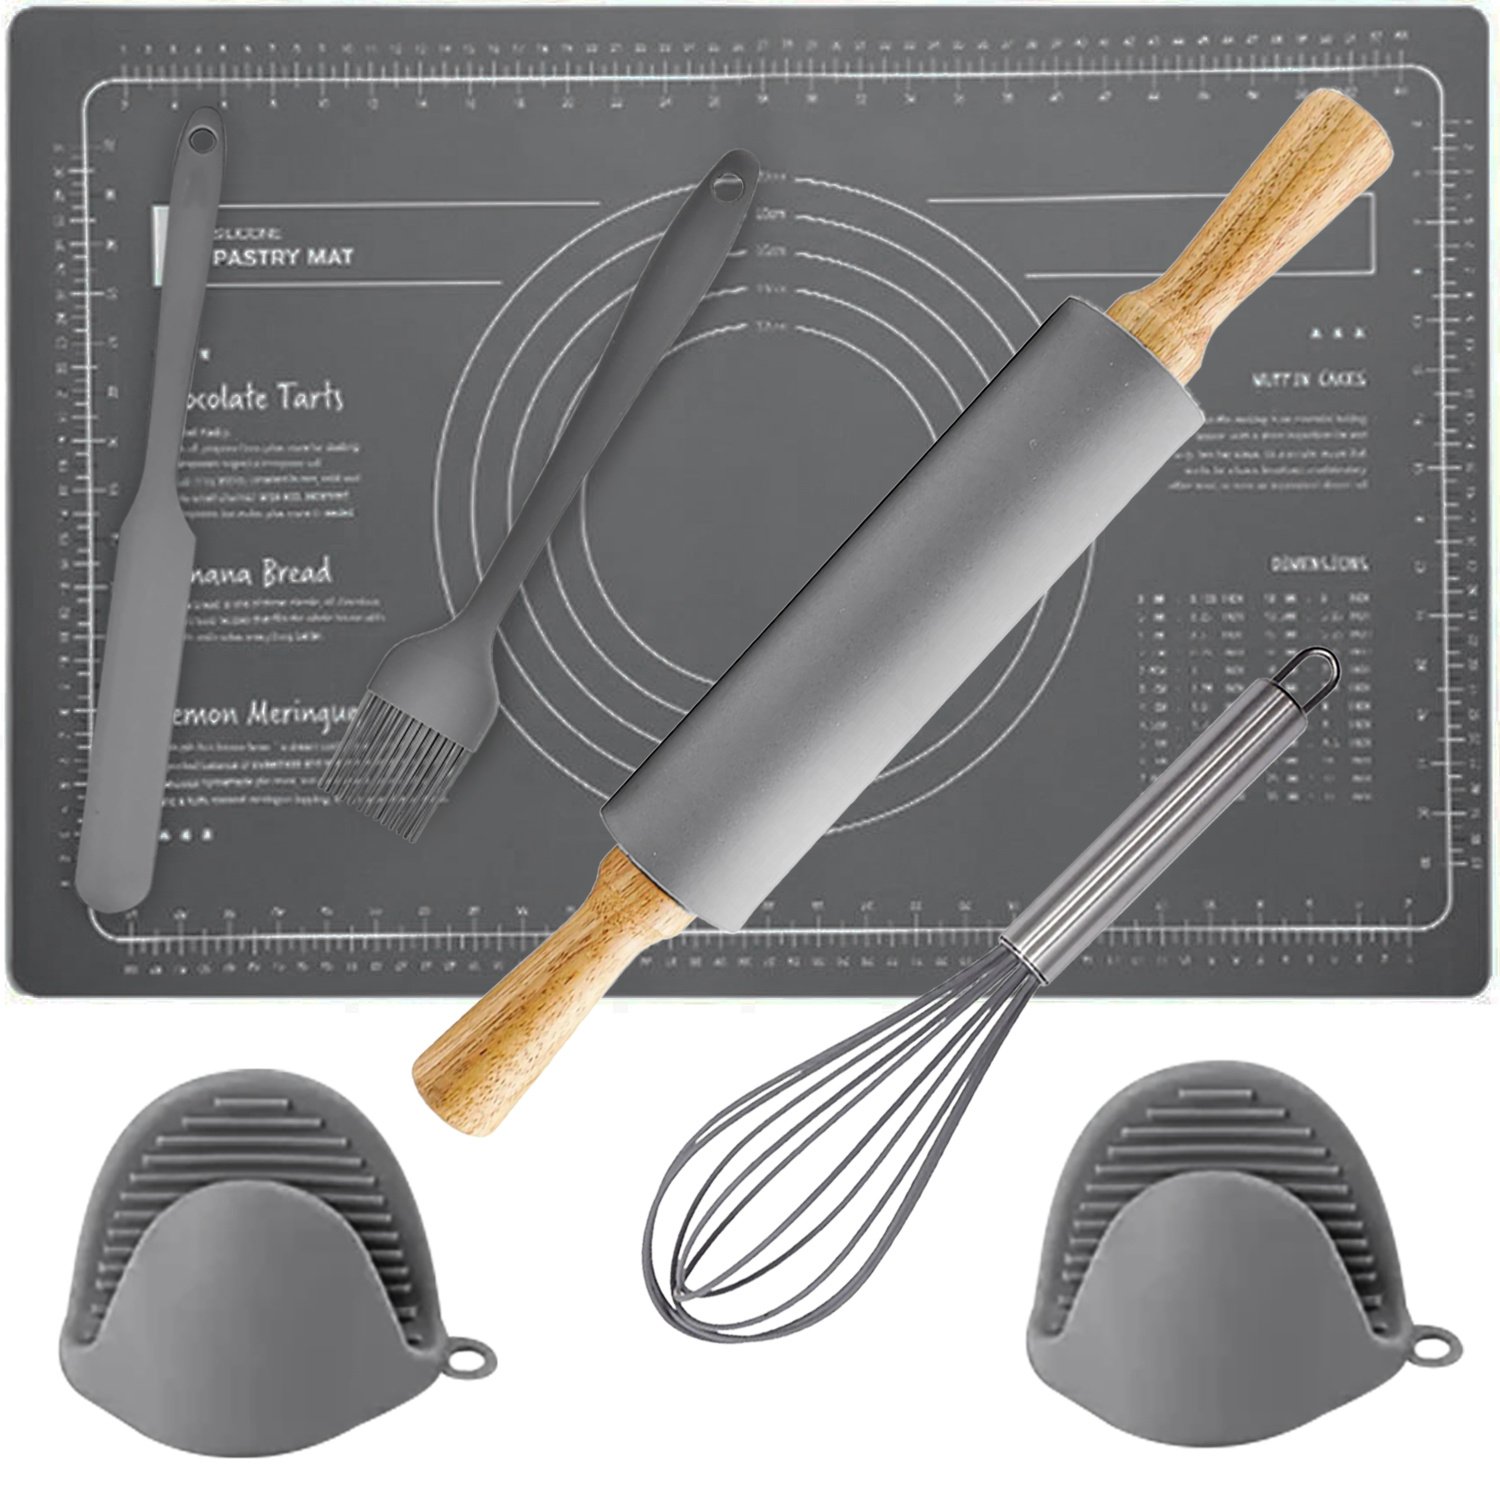 https://cdn.webshopapp.com/shops/38765/files/429991798/silicone-baking-cooking-and-dough-kneading-set-wit.jpg